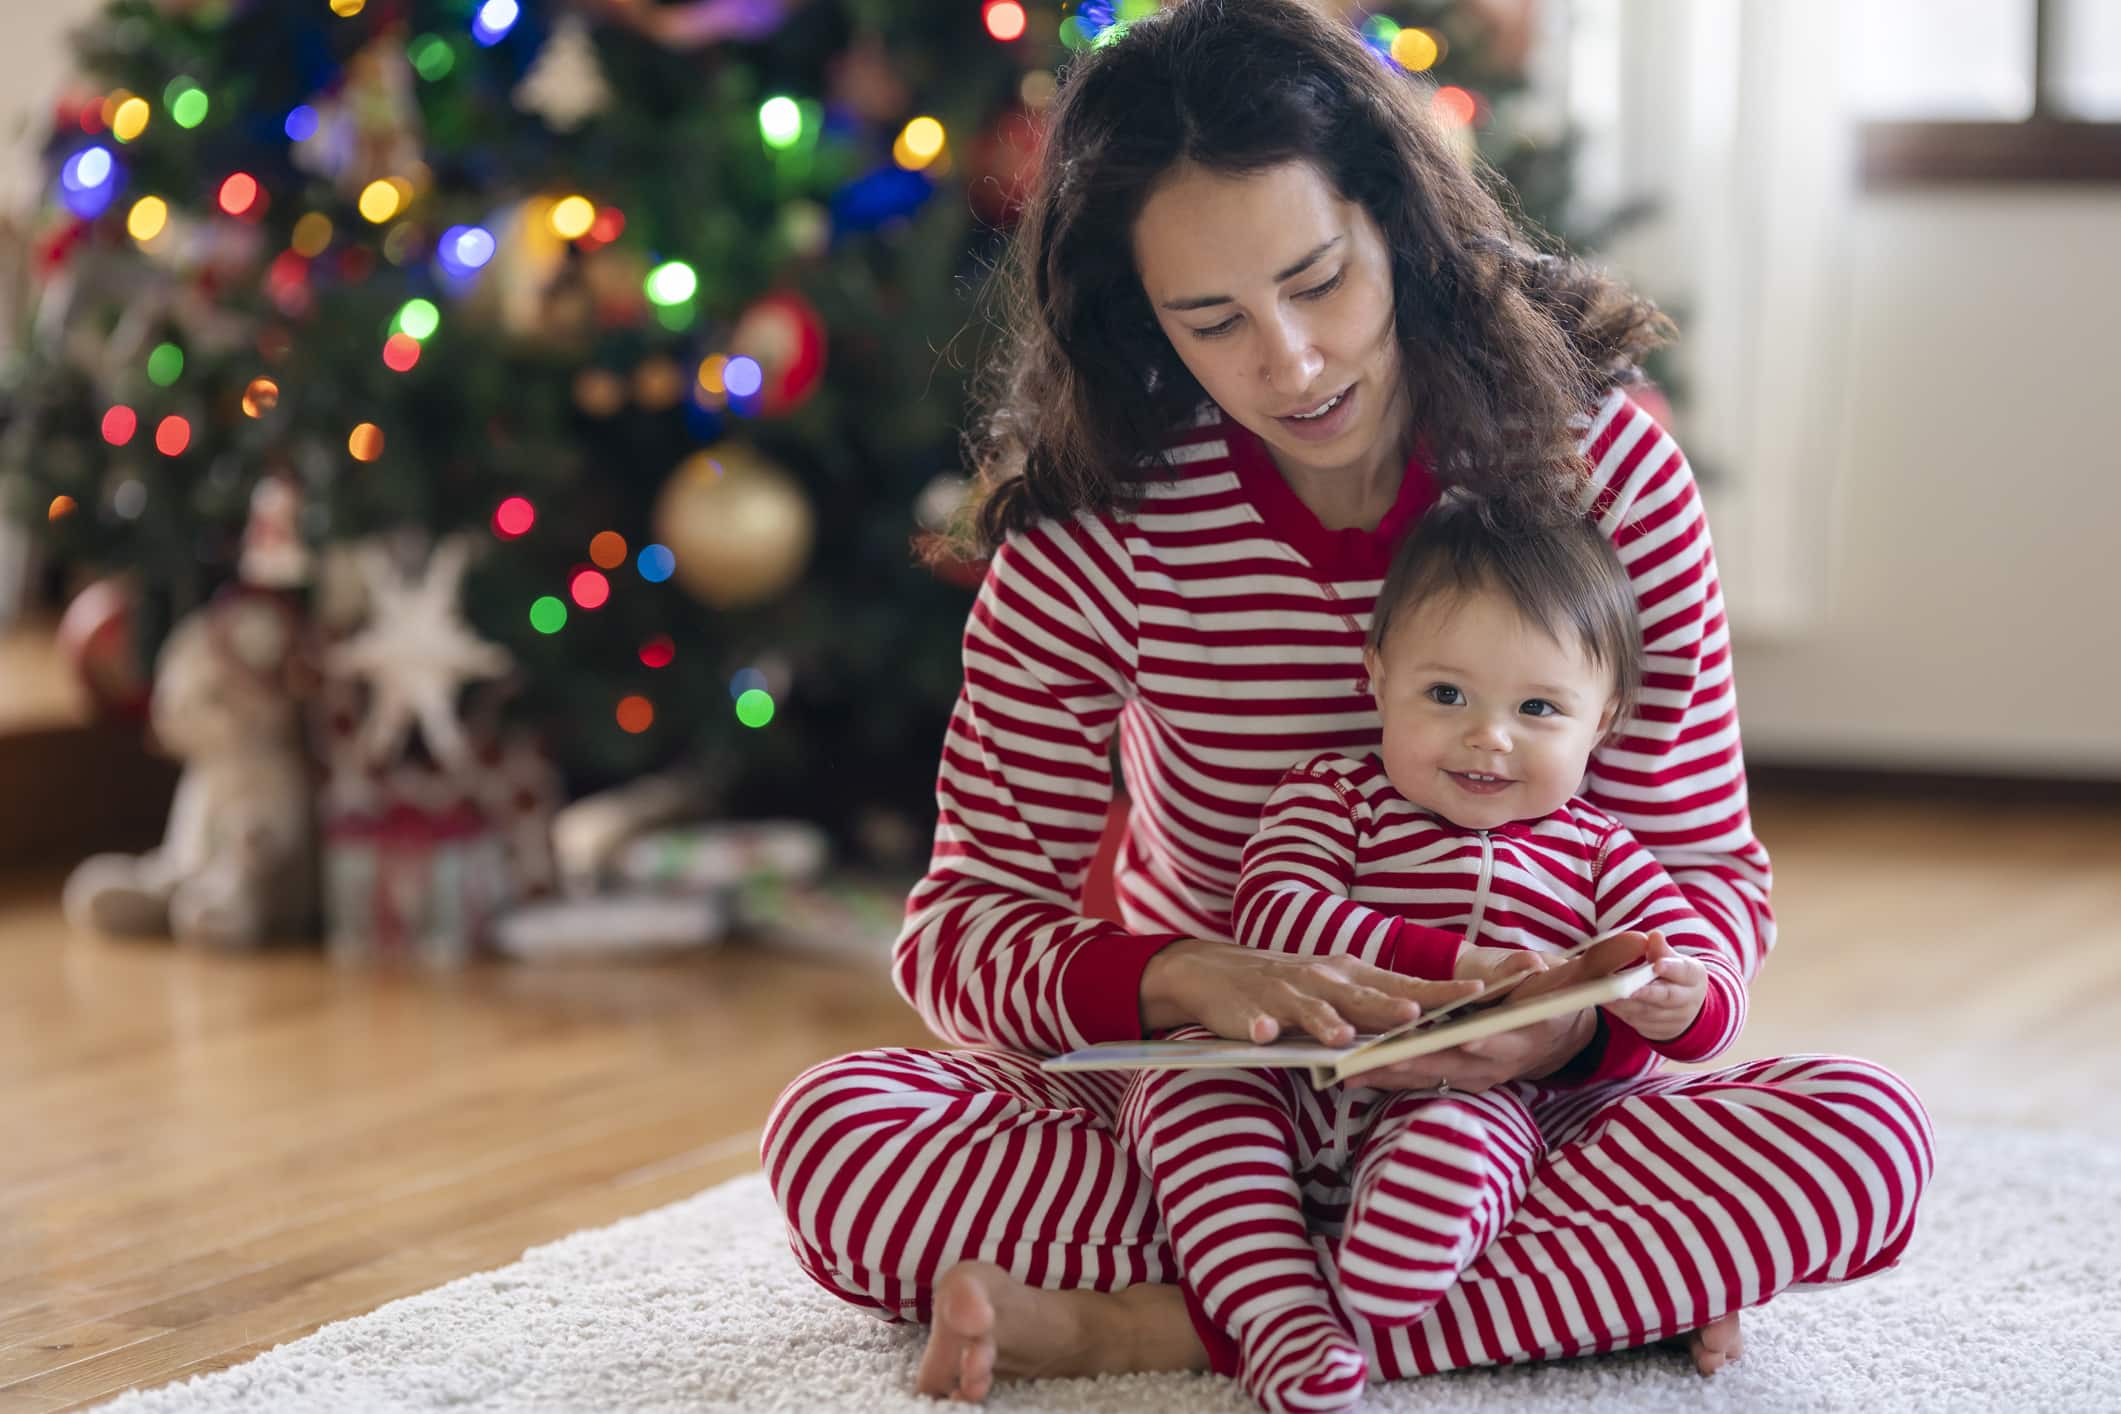 An adorable mixed race baby sits in her mother's lap and smiles as they read a book together. The family is celebrating the baby's first Christmas with a cozy day at home.